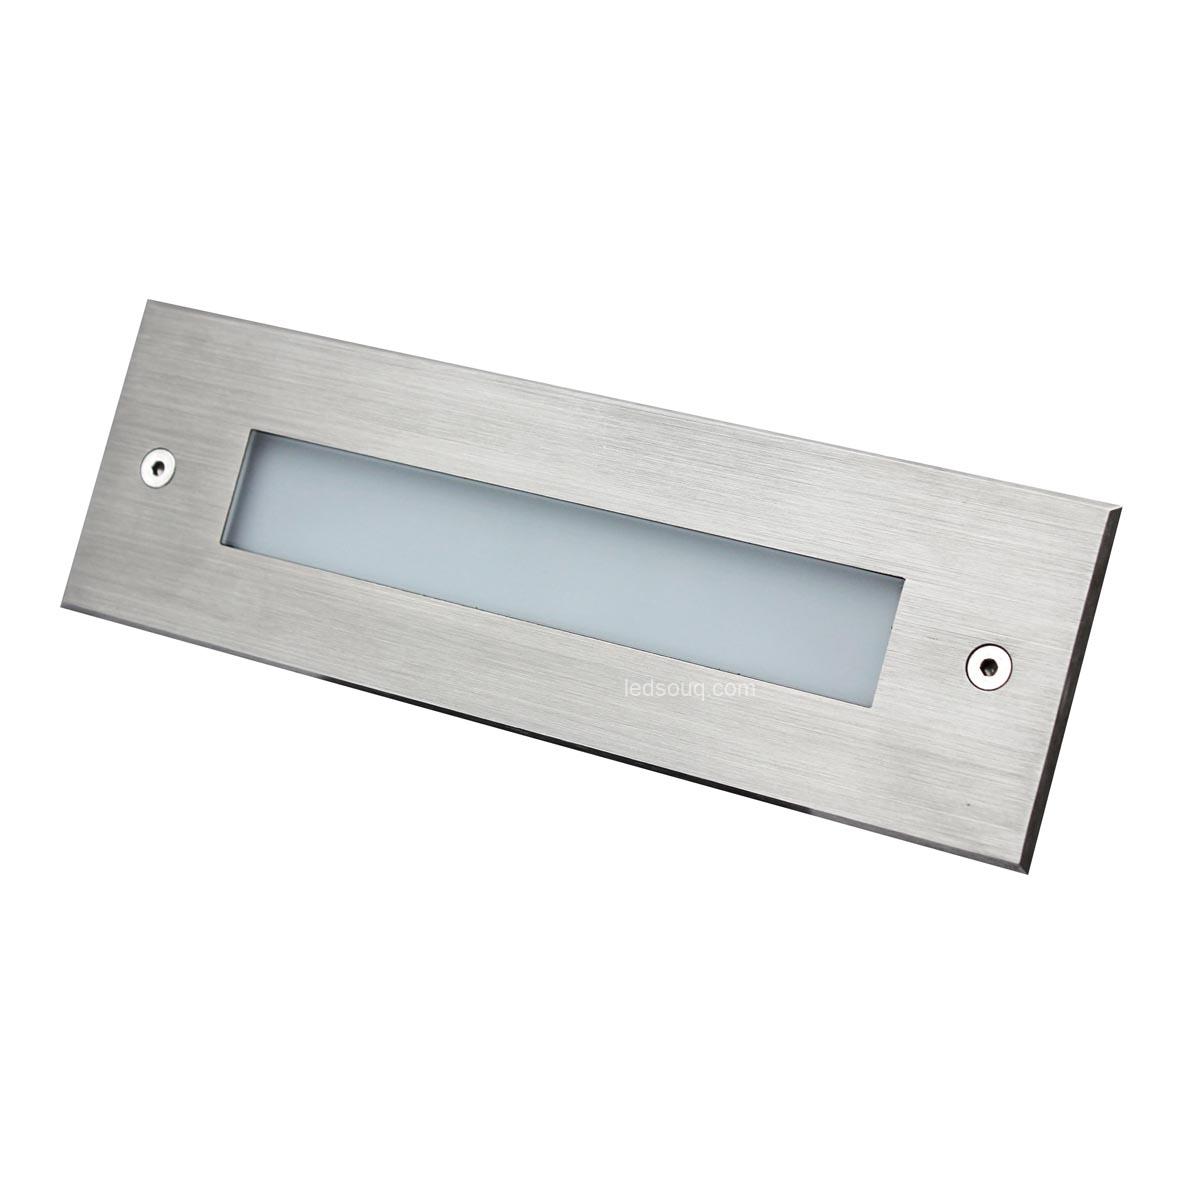 LED recessed low energy LED wall light